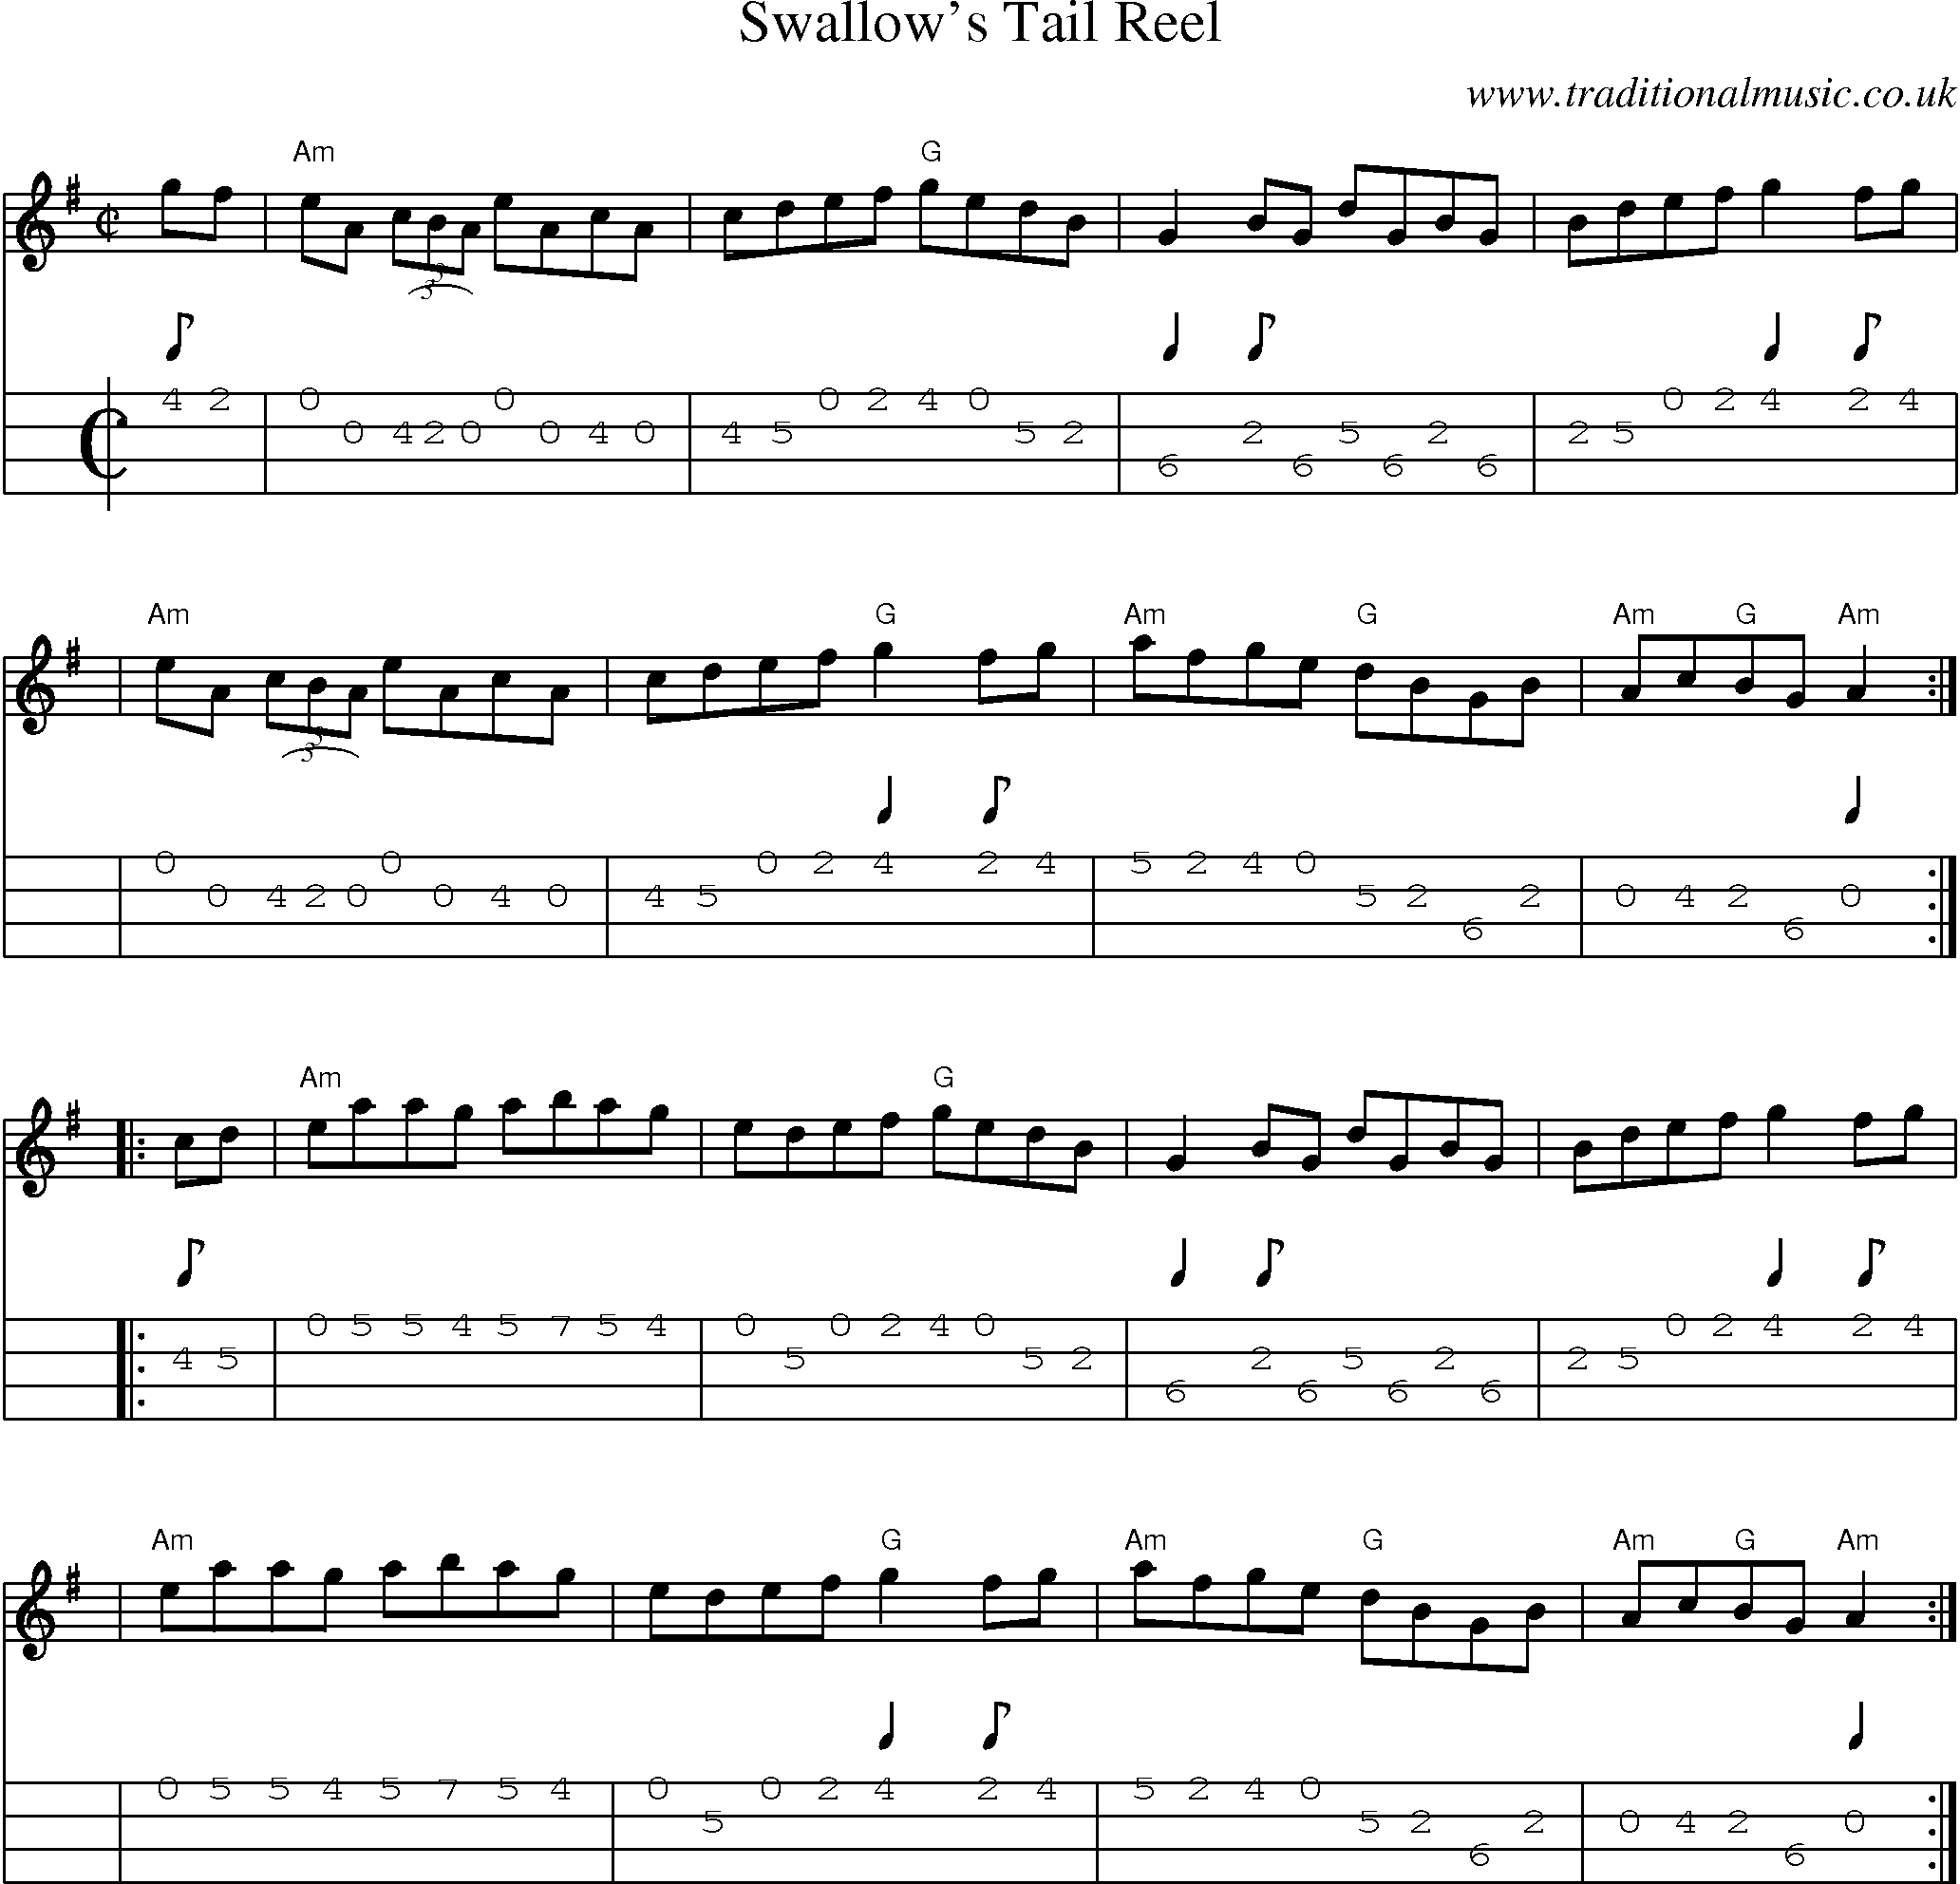 Music Score and Mandolin Tabs for Swallows Tail Reel